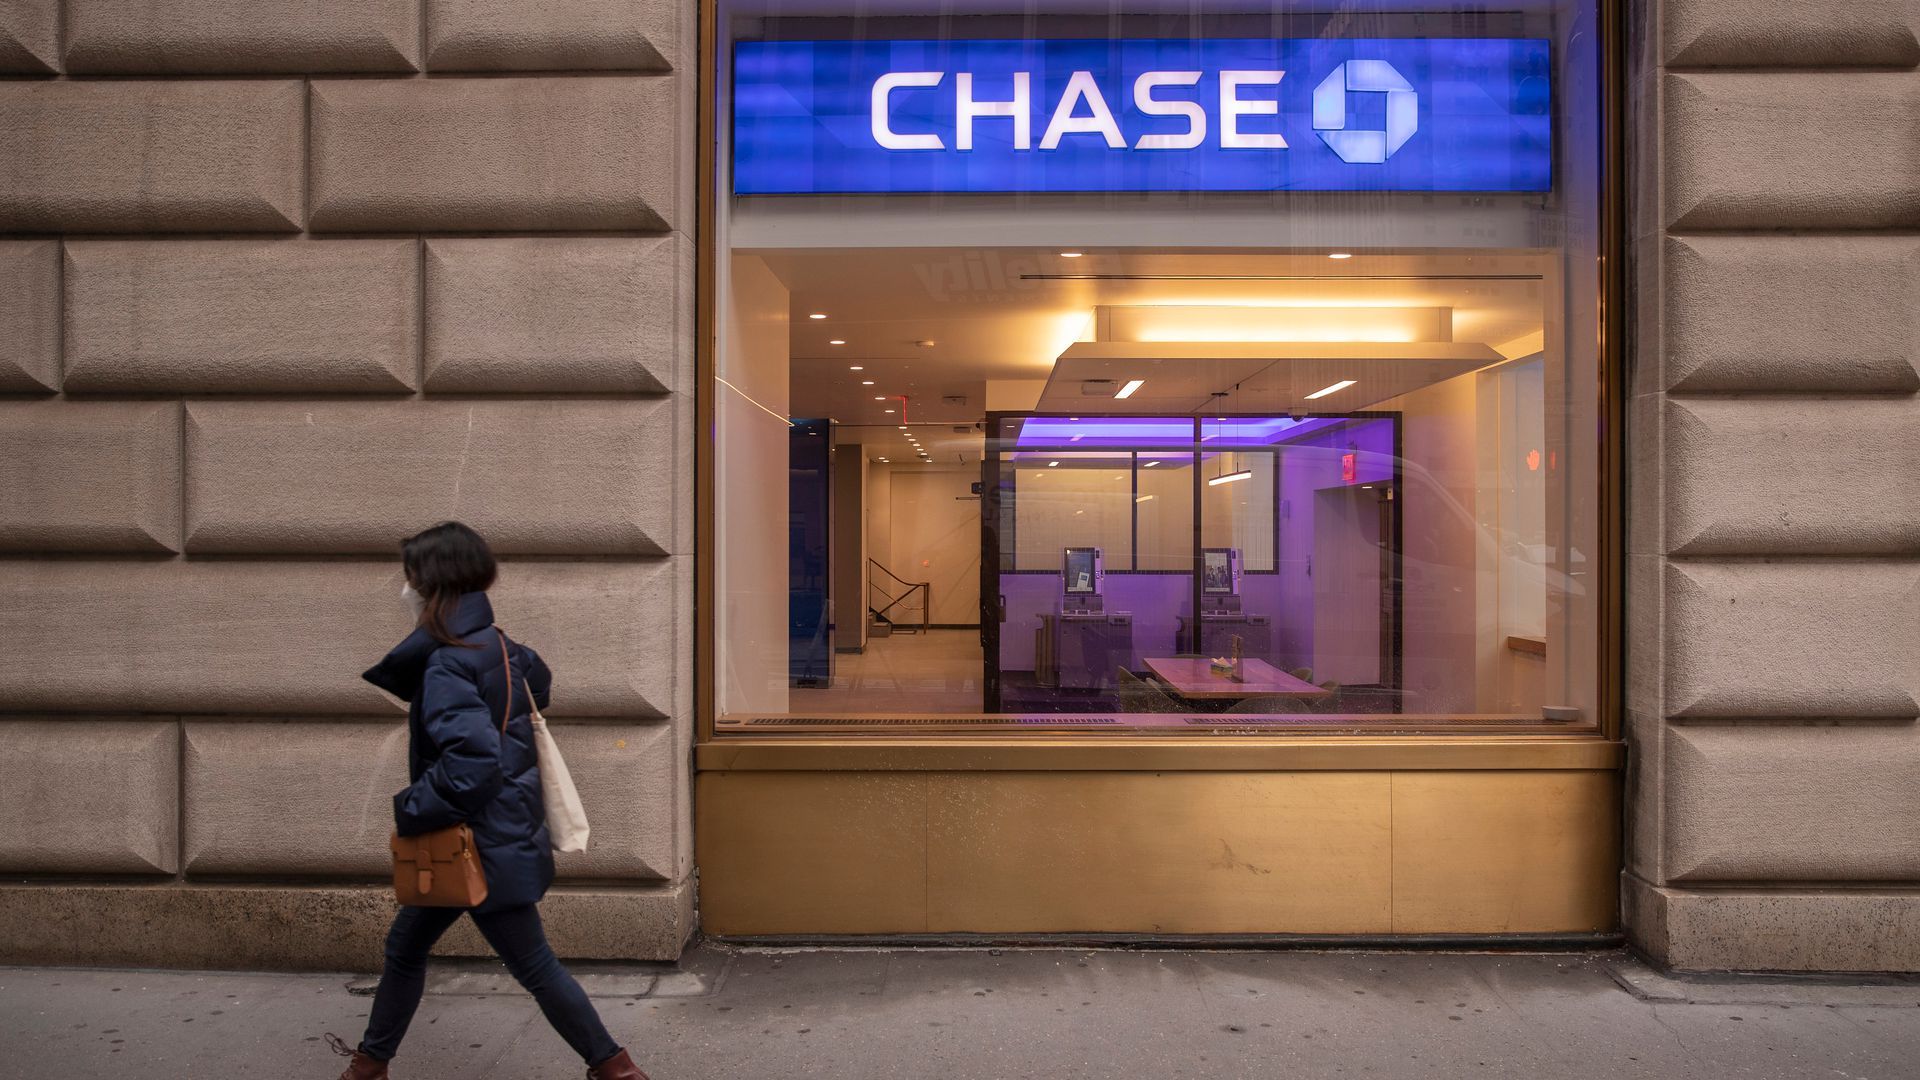 A person walks on the sidewalk alongside a Chase bank sign.